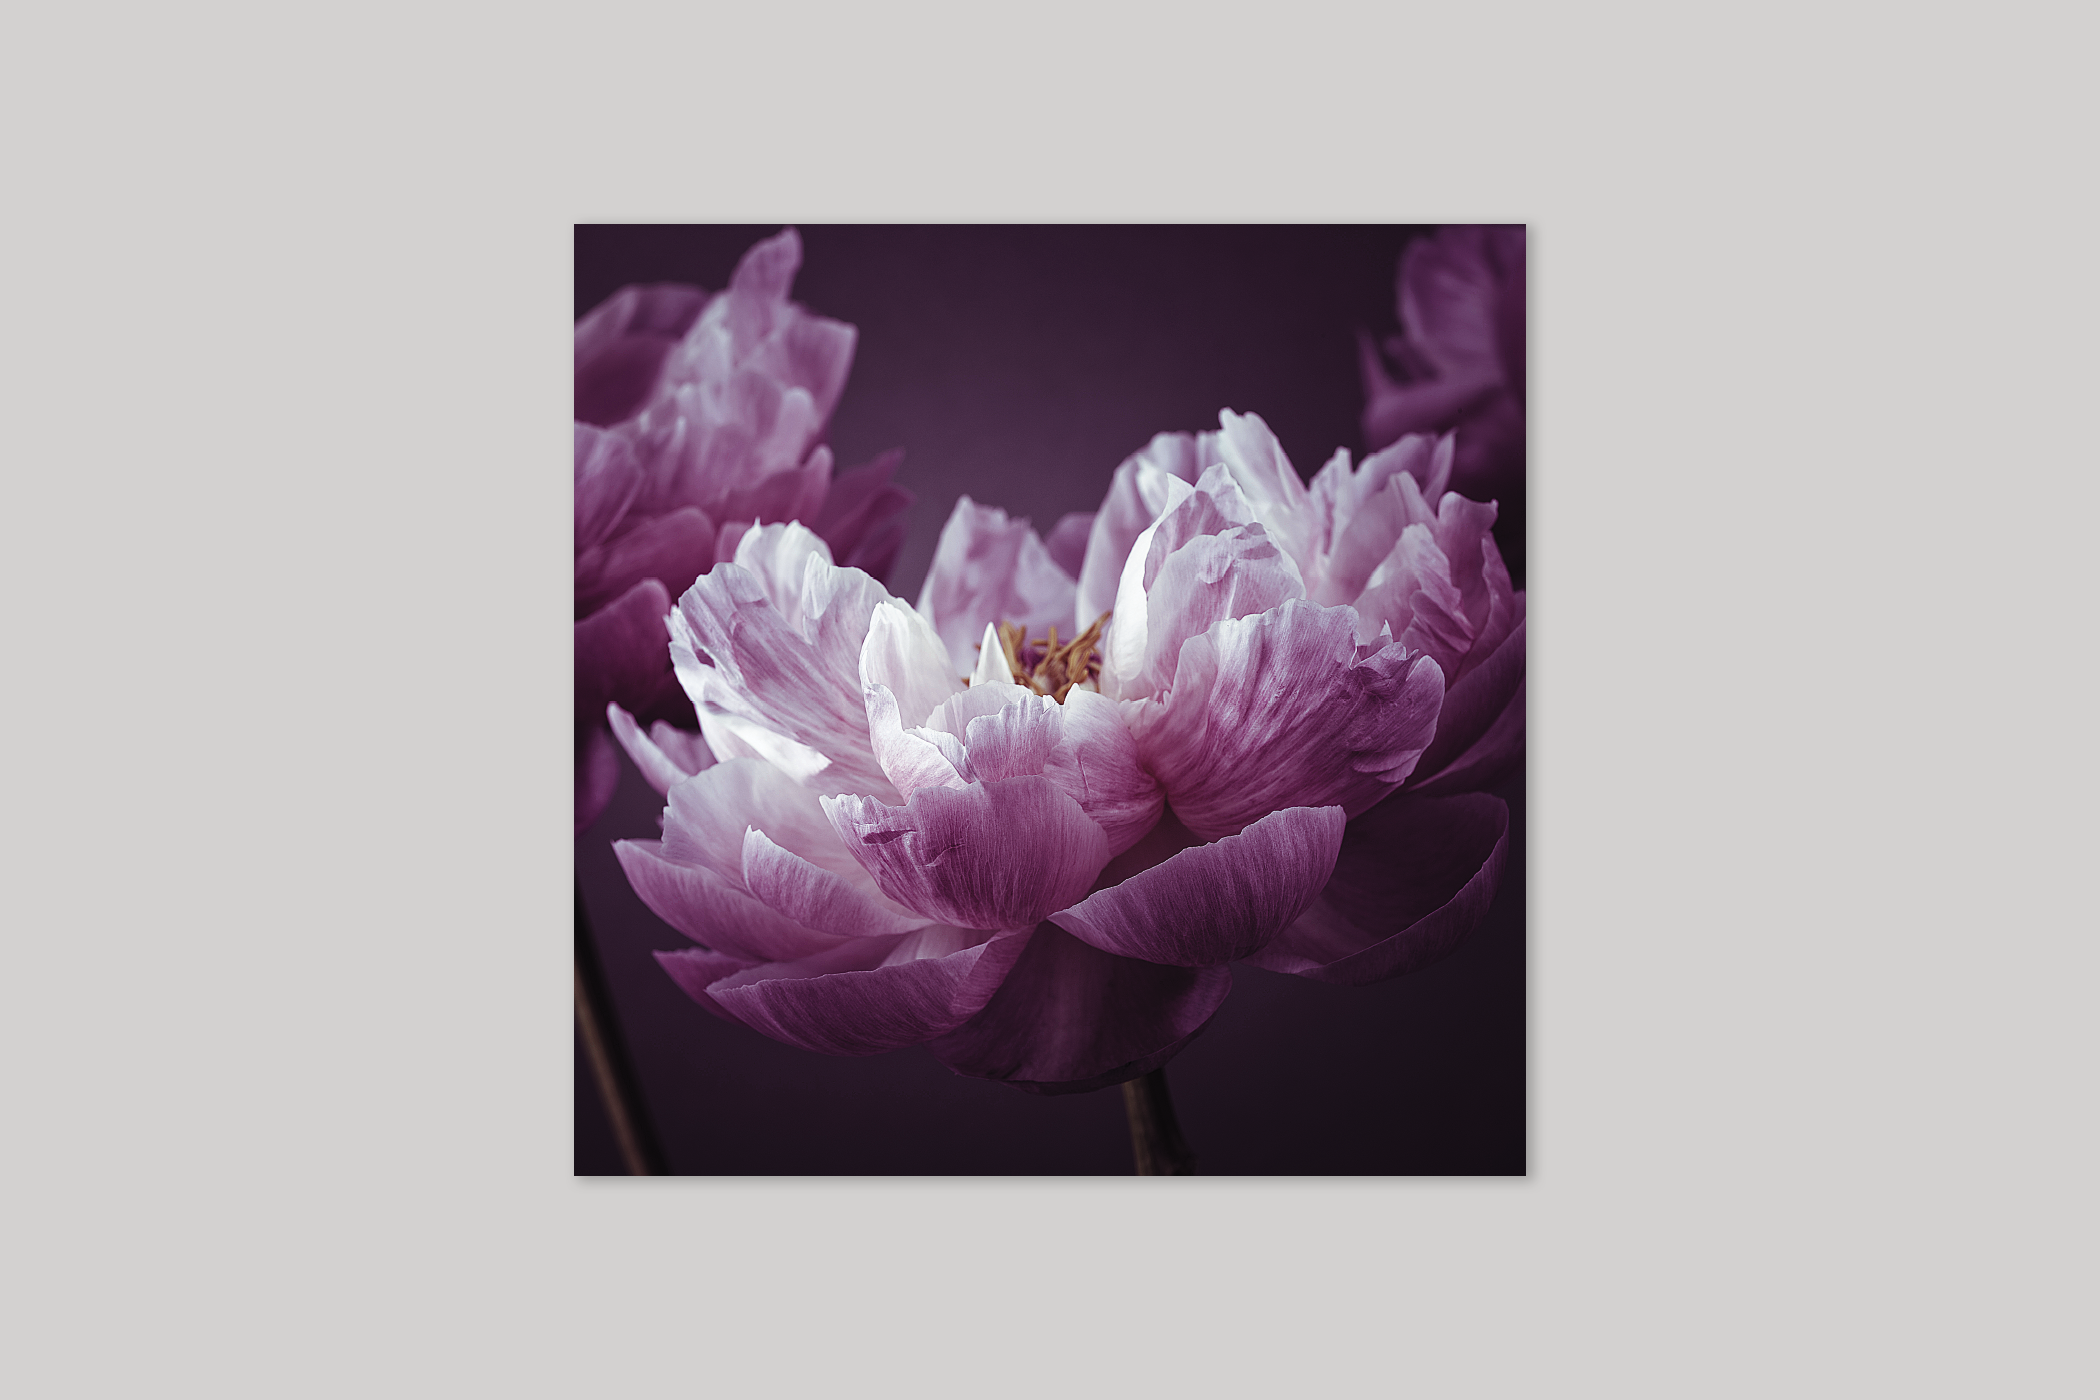 Precious from Bloom range of floral photographic cards by Icon.